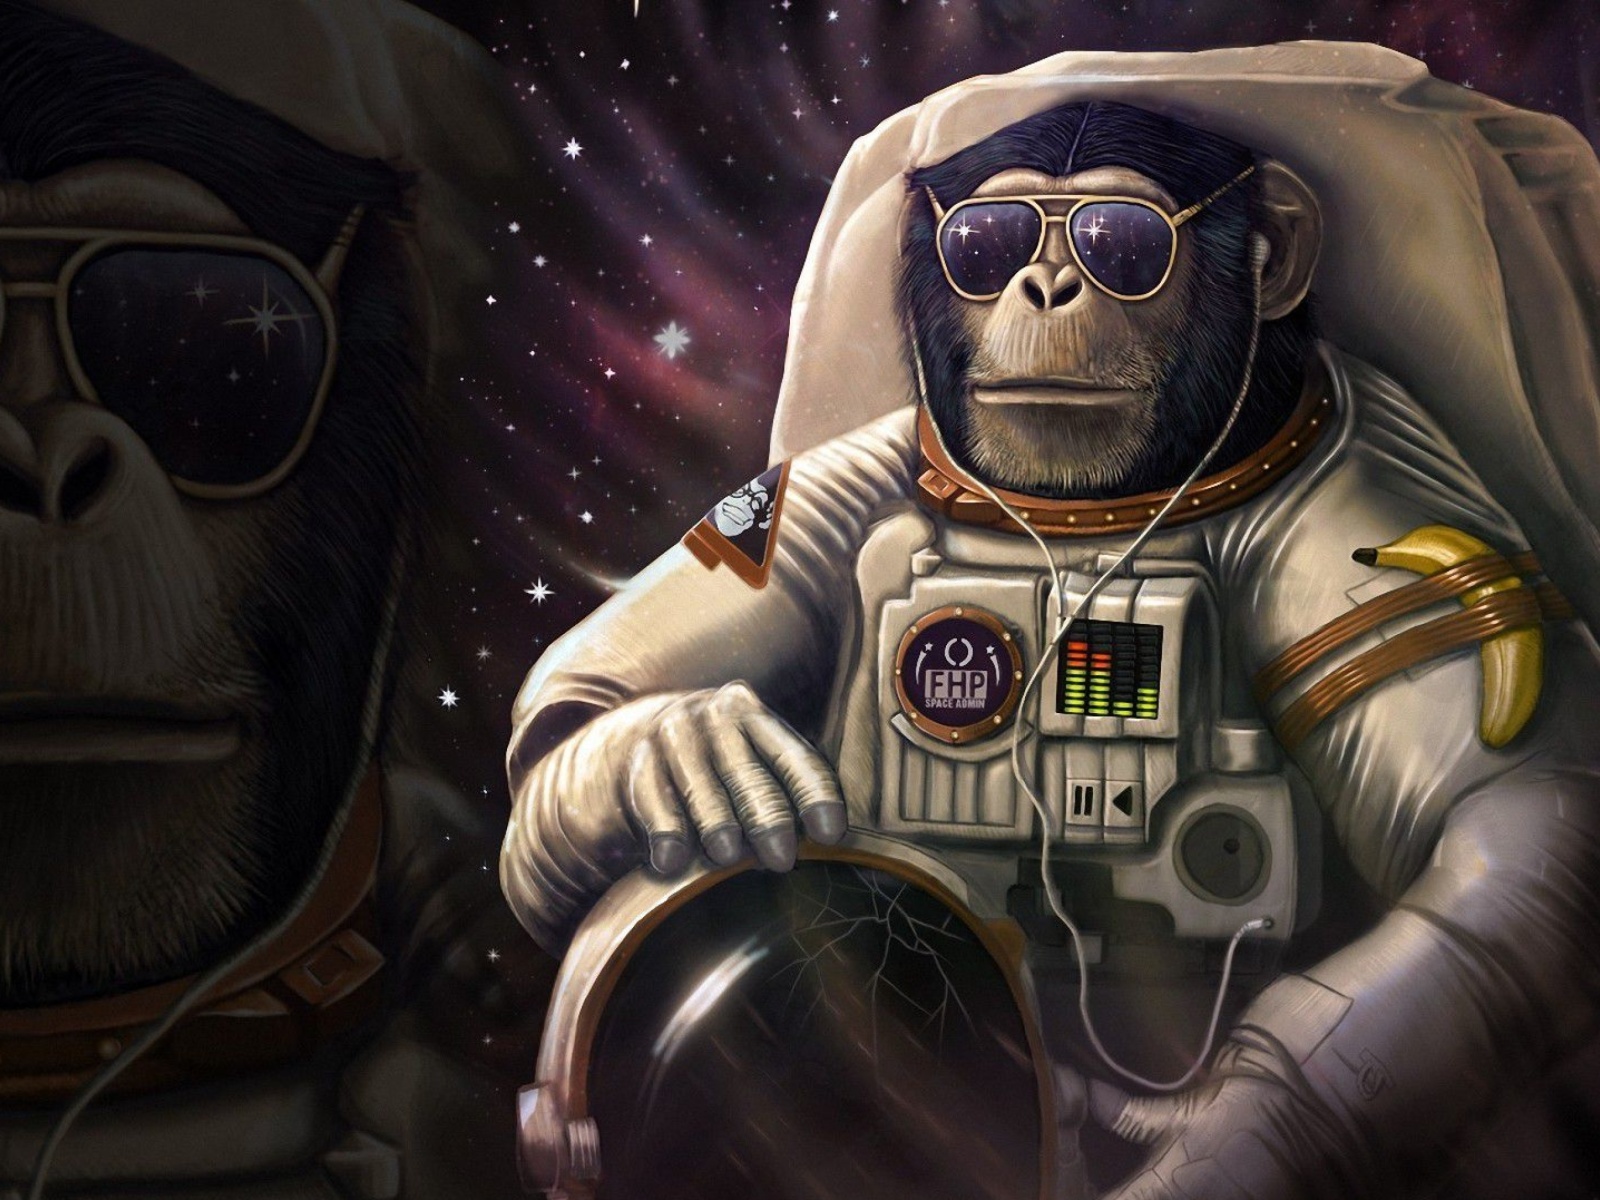 Monkeys and apes in space screenshot #1 1600x1200